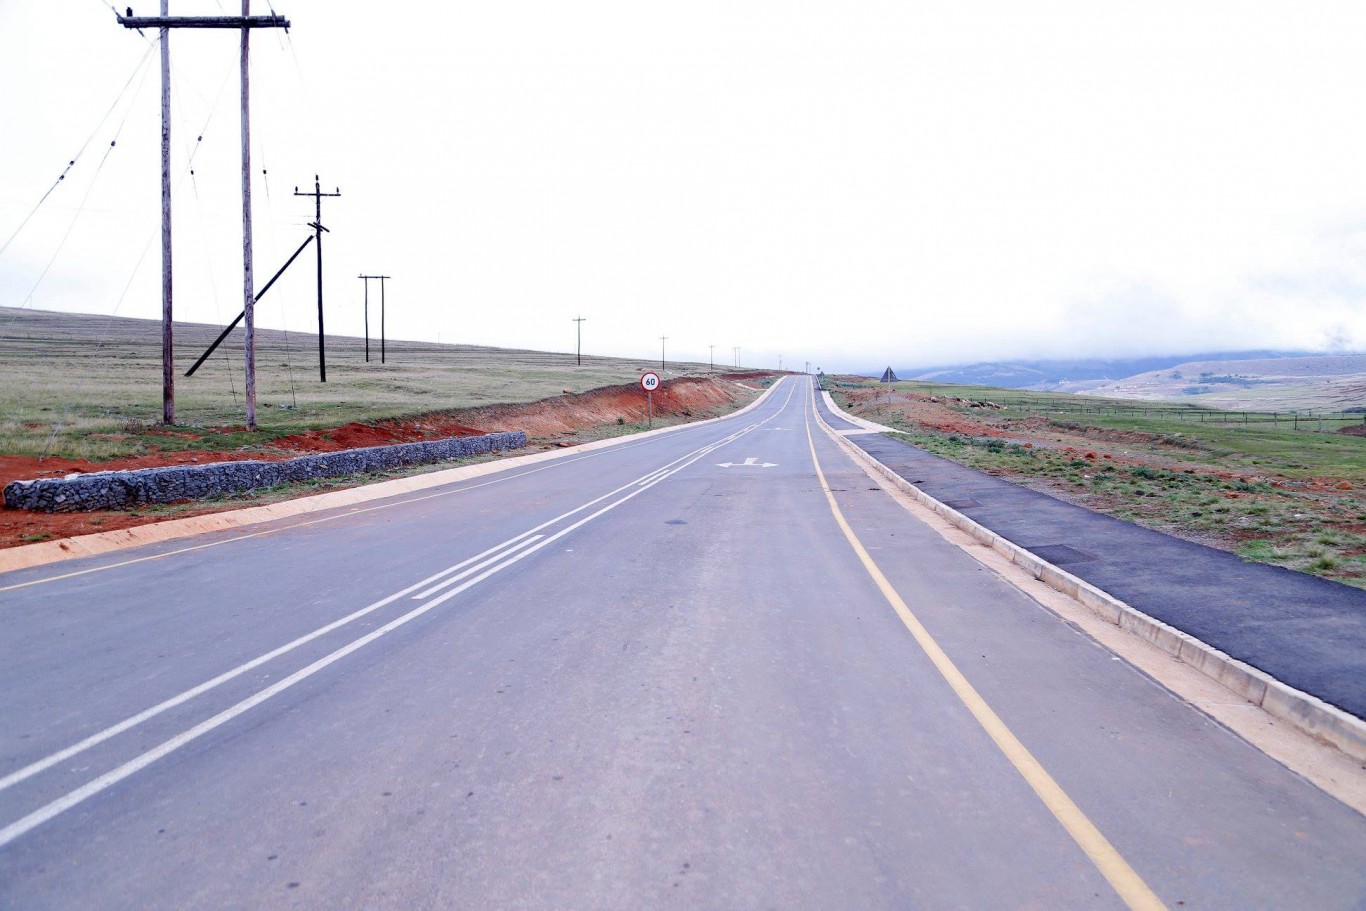 MEC Kaunda to officiate the opening of two major roads - P373 and P280 in Umsinga